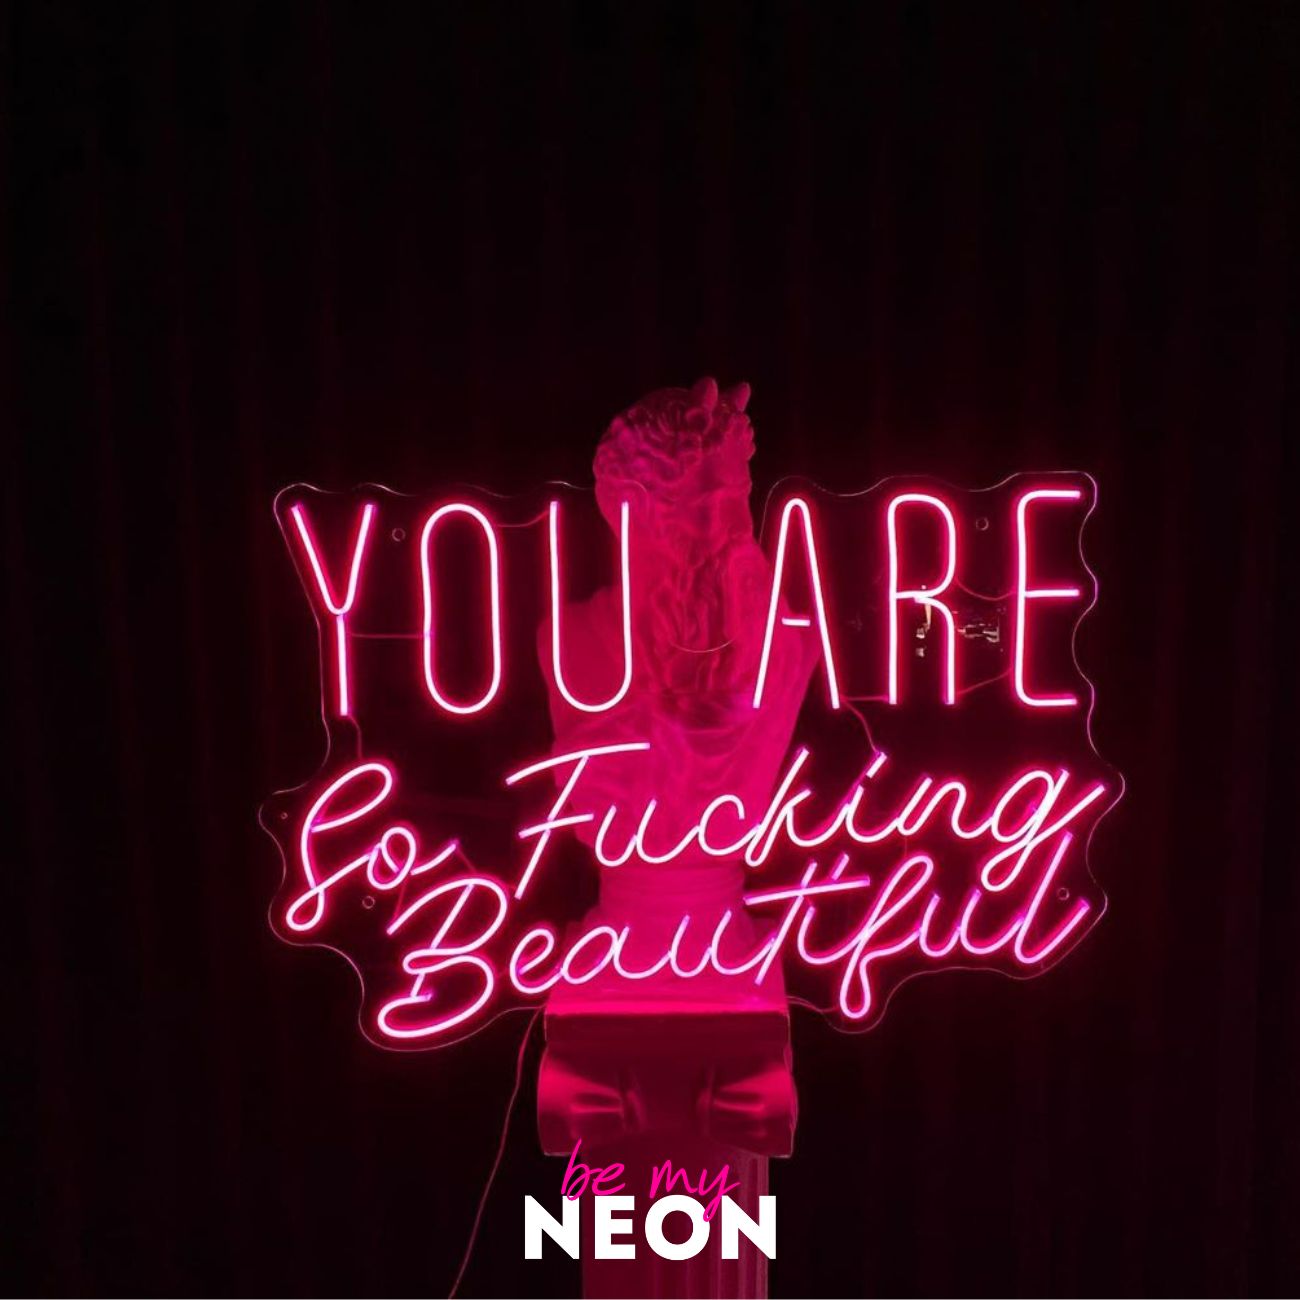 "You are so beautiful" LED Neonschild